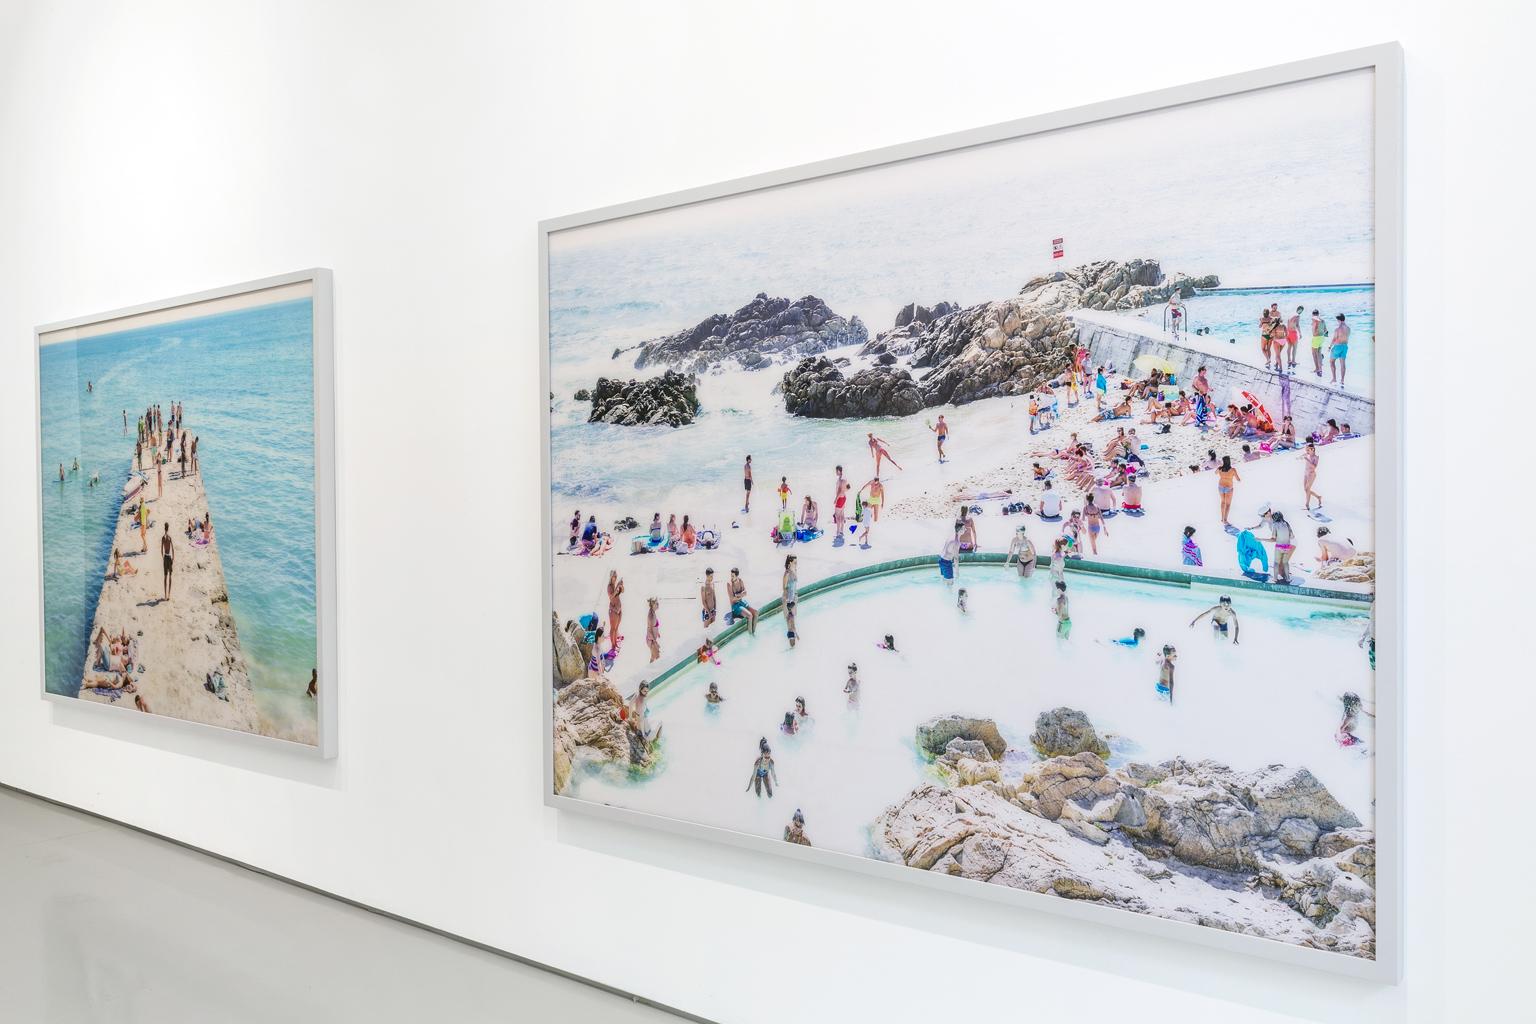 A unique panoramic format photograph of iconic summer beach scene along the Mediterranean coast of Tuscany by Italian photographer Massimo Vitali, renowned for his grand scale topographical observations of the summer rites and rituals of modern